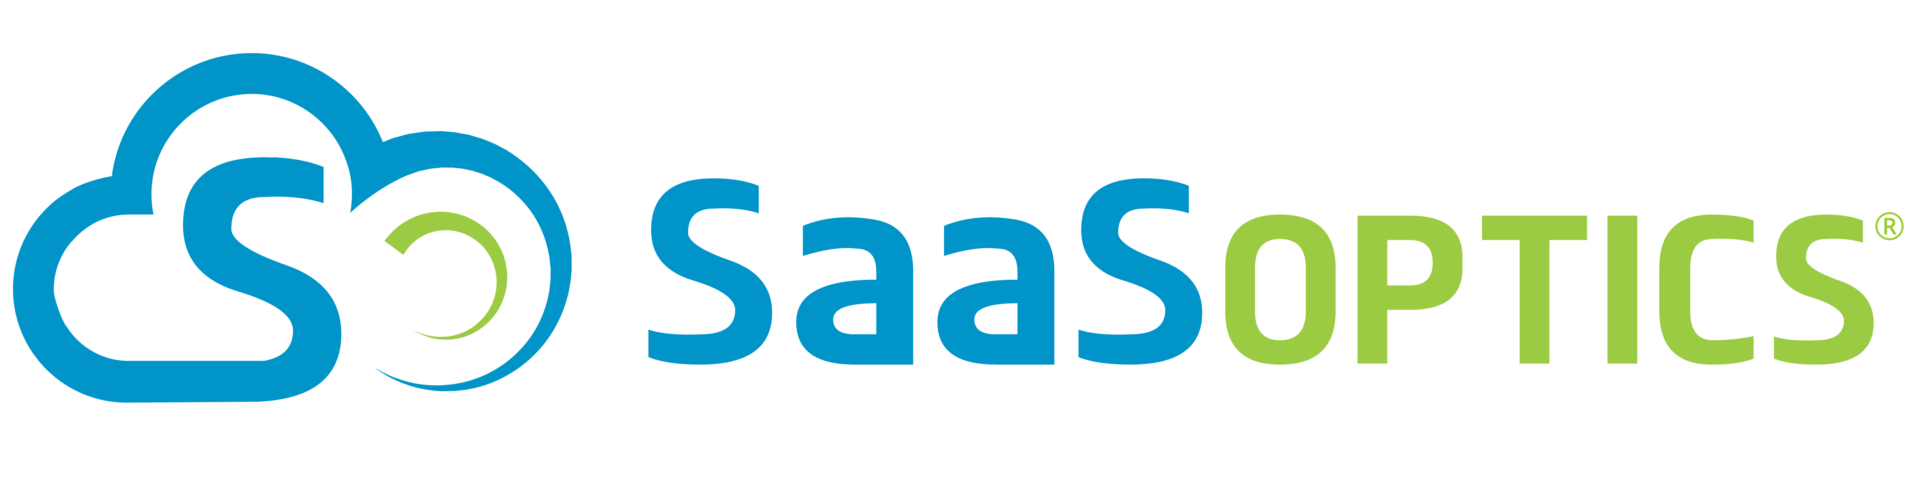 SaaSOptics Announces $12M in Series B Funding Following Record-Breaking Q3 with 70 Percent New Annual Recurring Revenue Bookings Growth